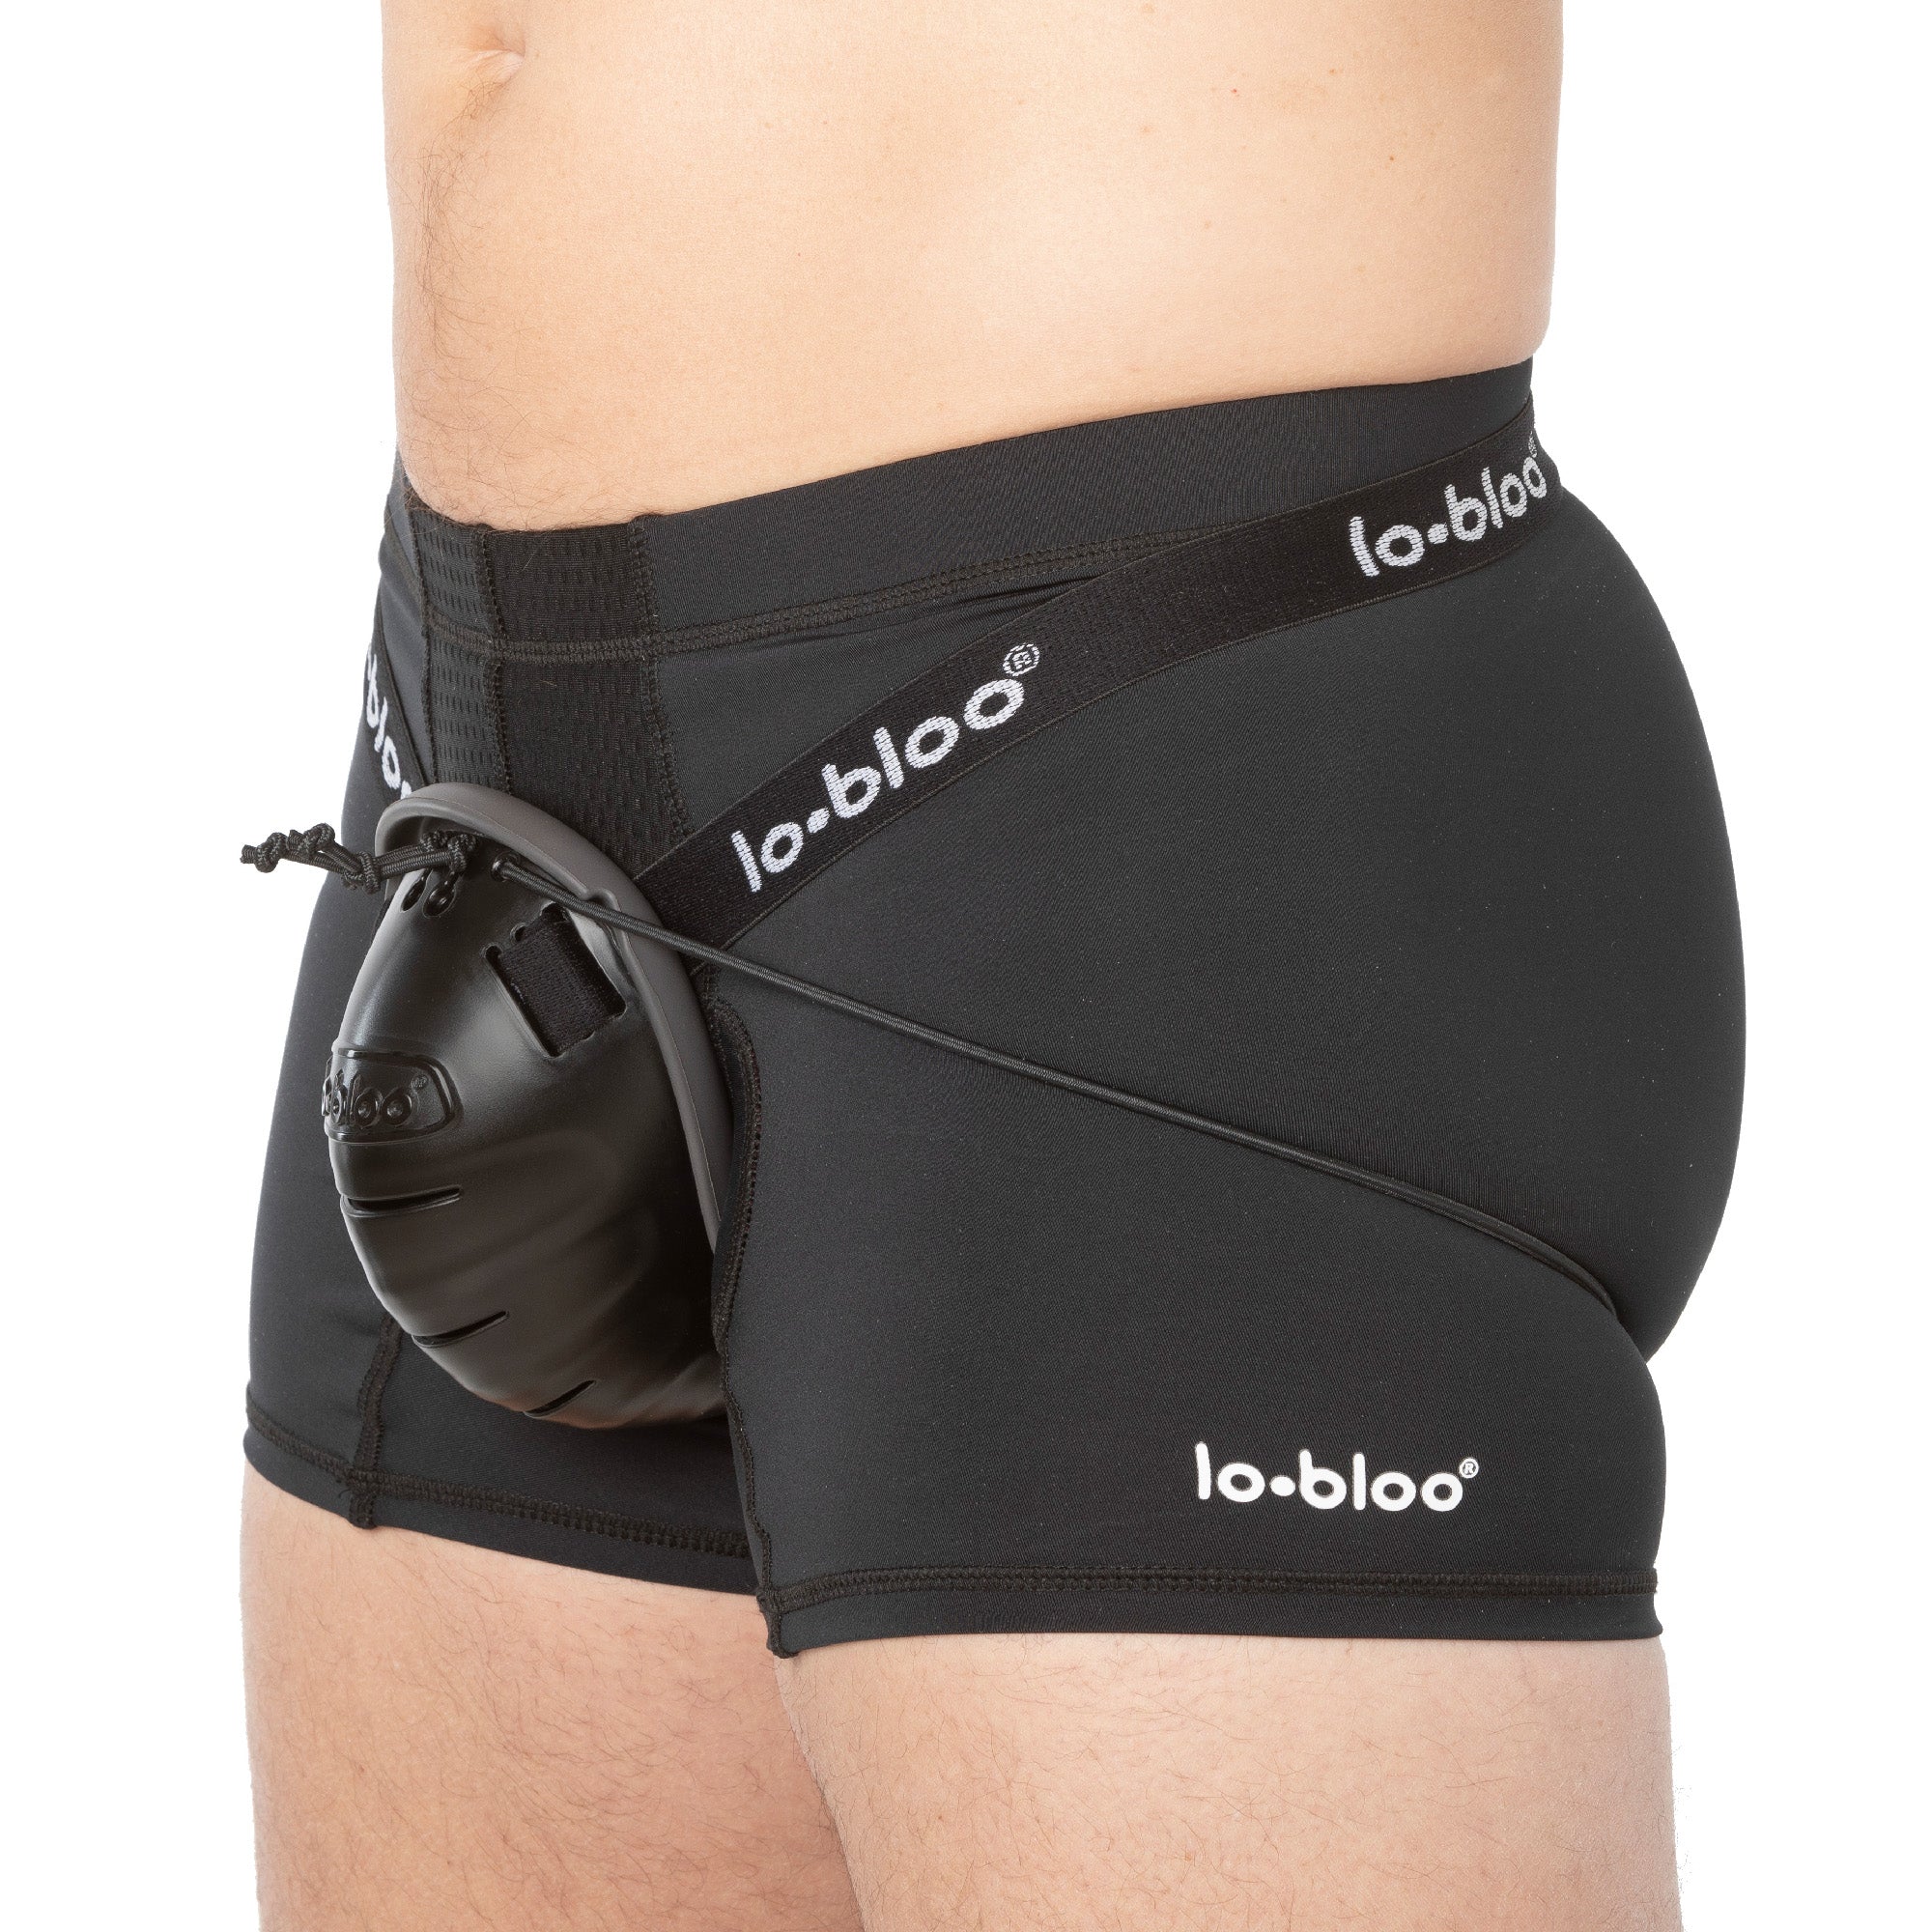 lobloo® MMA CUP athletic groin cup